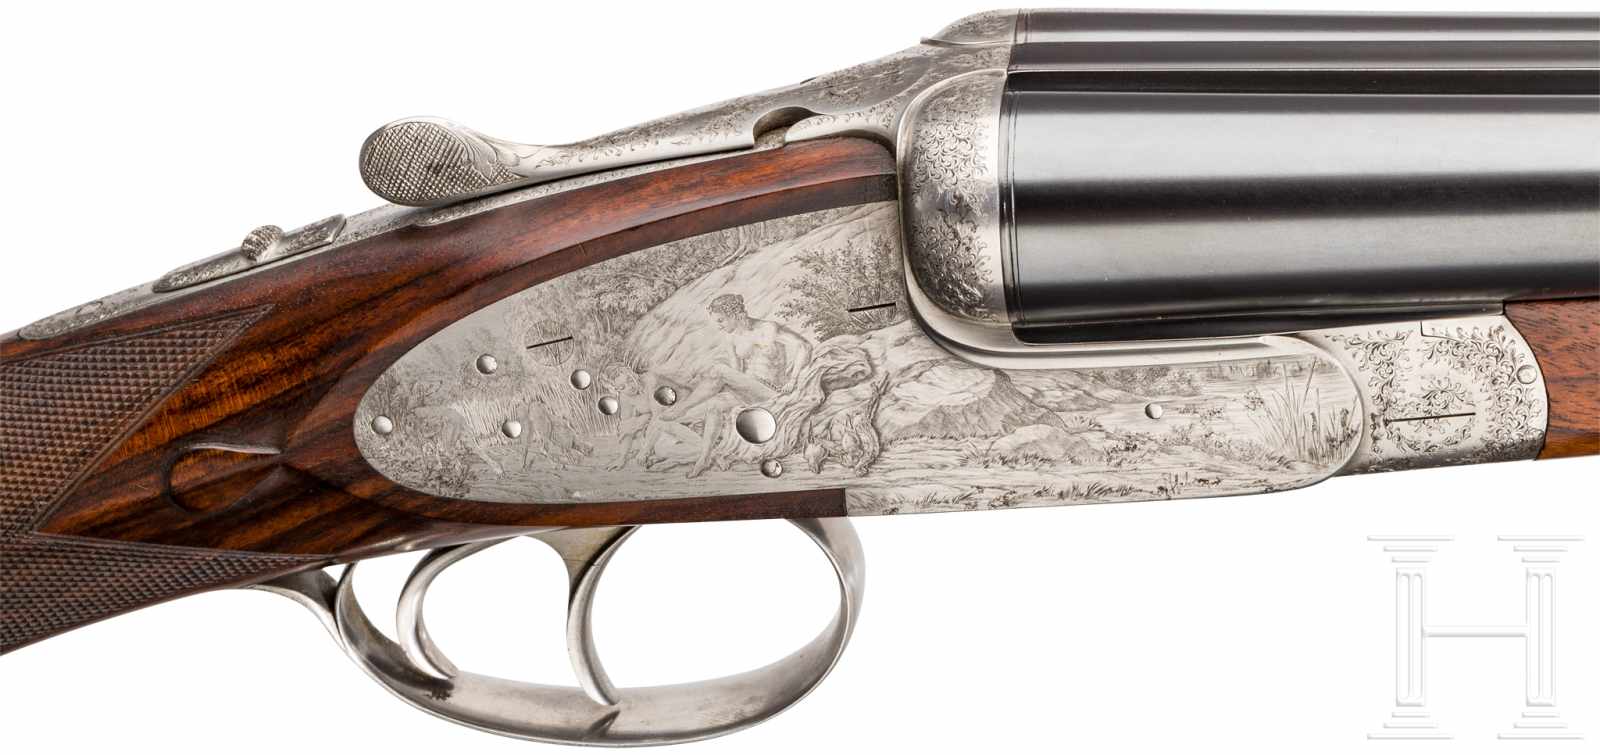 A side-by-side shotgun by Abbiatico & Salvinelli, model Venus, burin engraving, Diana and virgins - Image 5 of 8